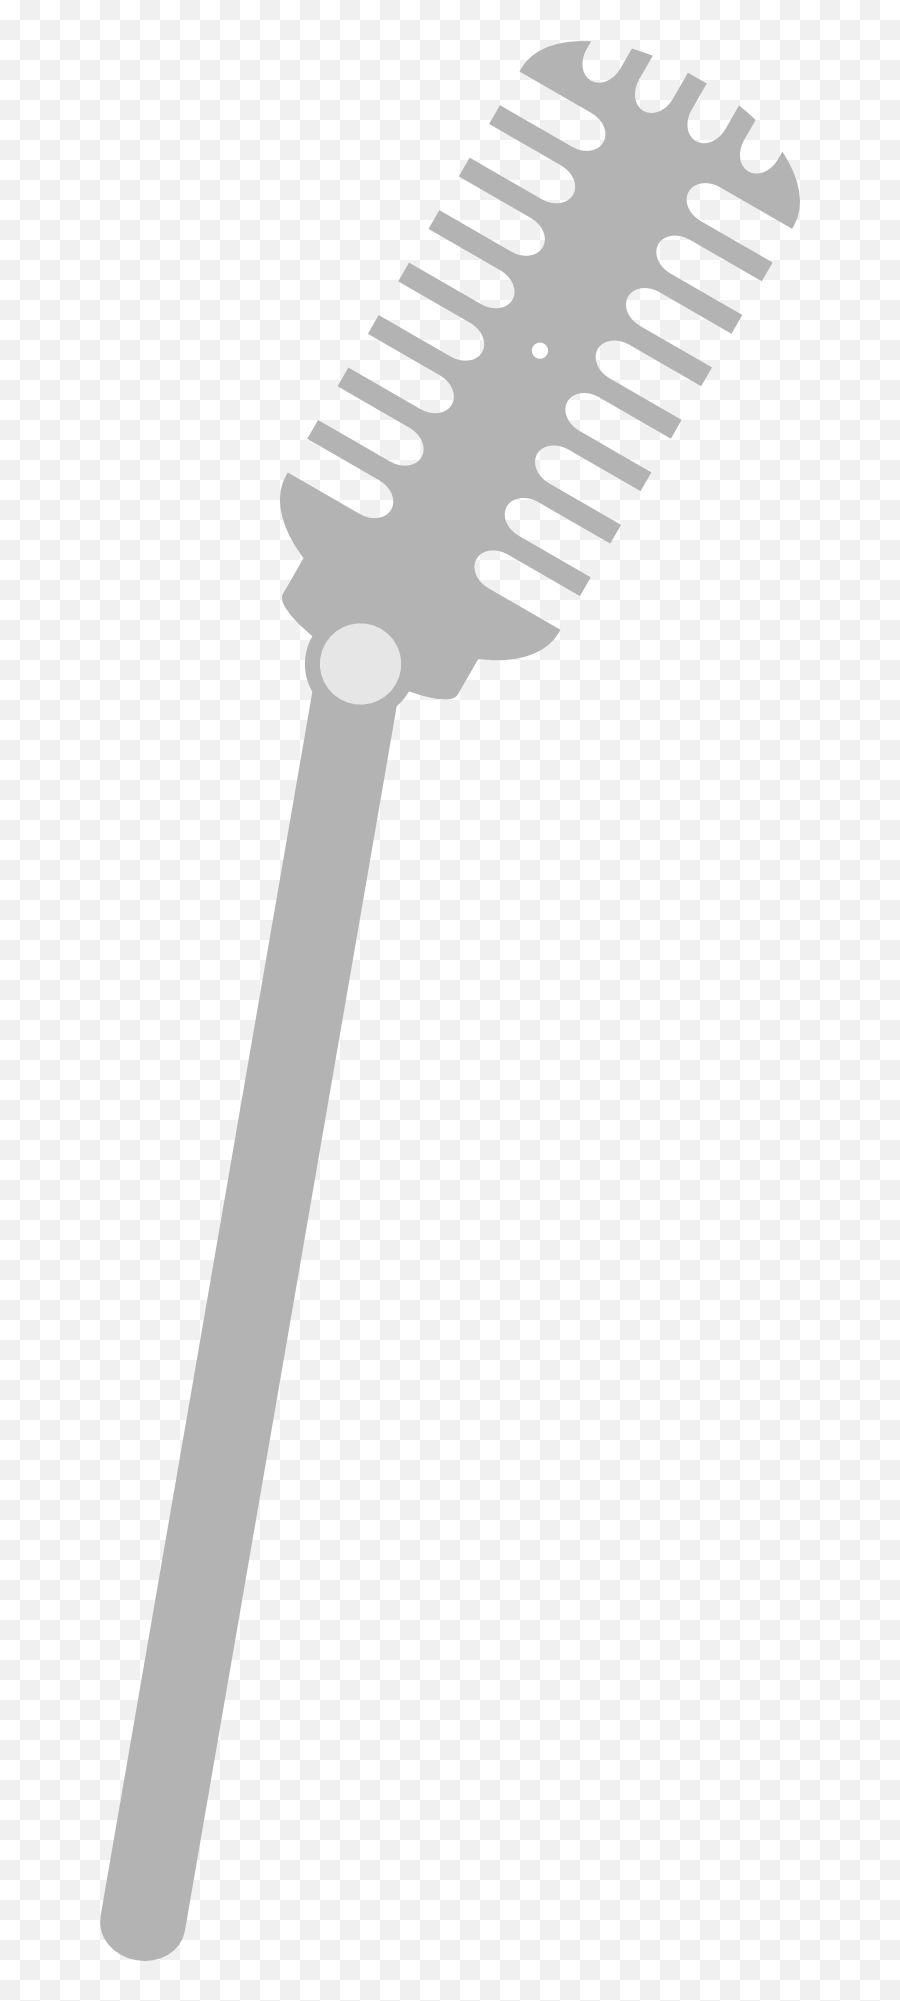 Grey Designed Microphone Clipart Free Image Emoji,Microphone Clipart